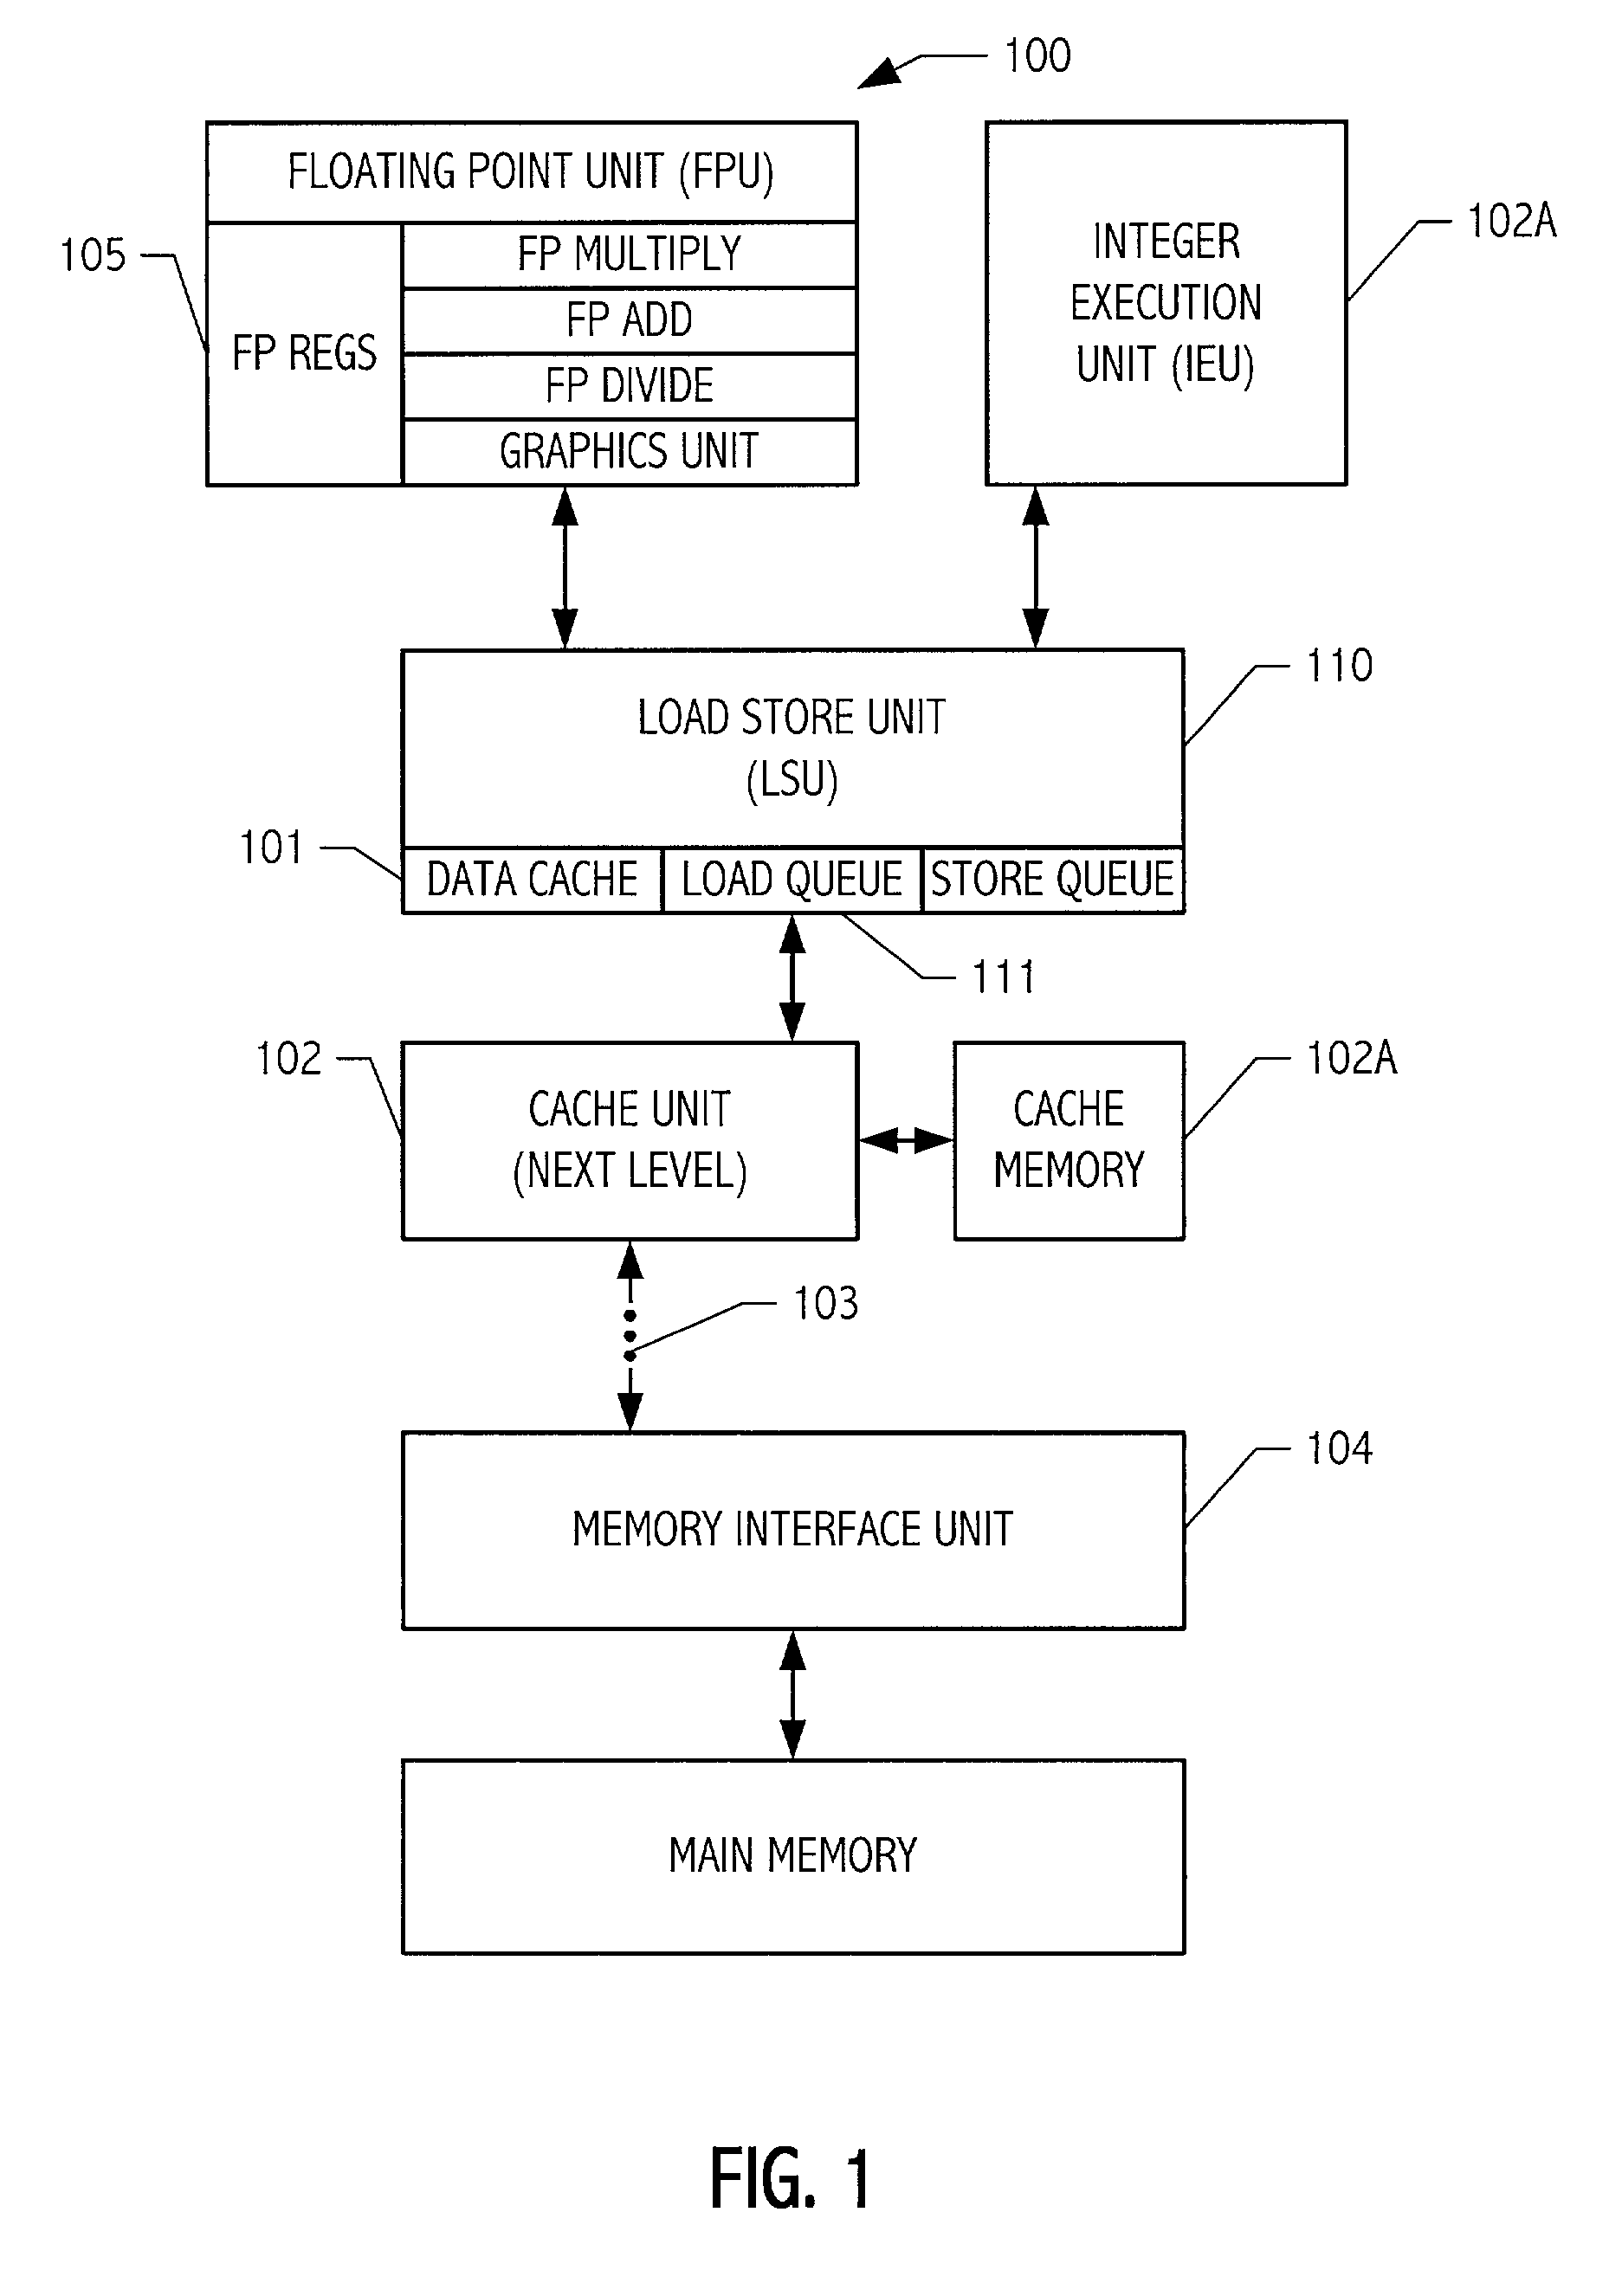 Technique for associating execution characteristics with instructions or operations of program code